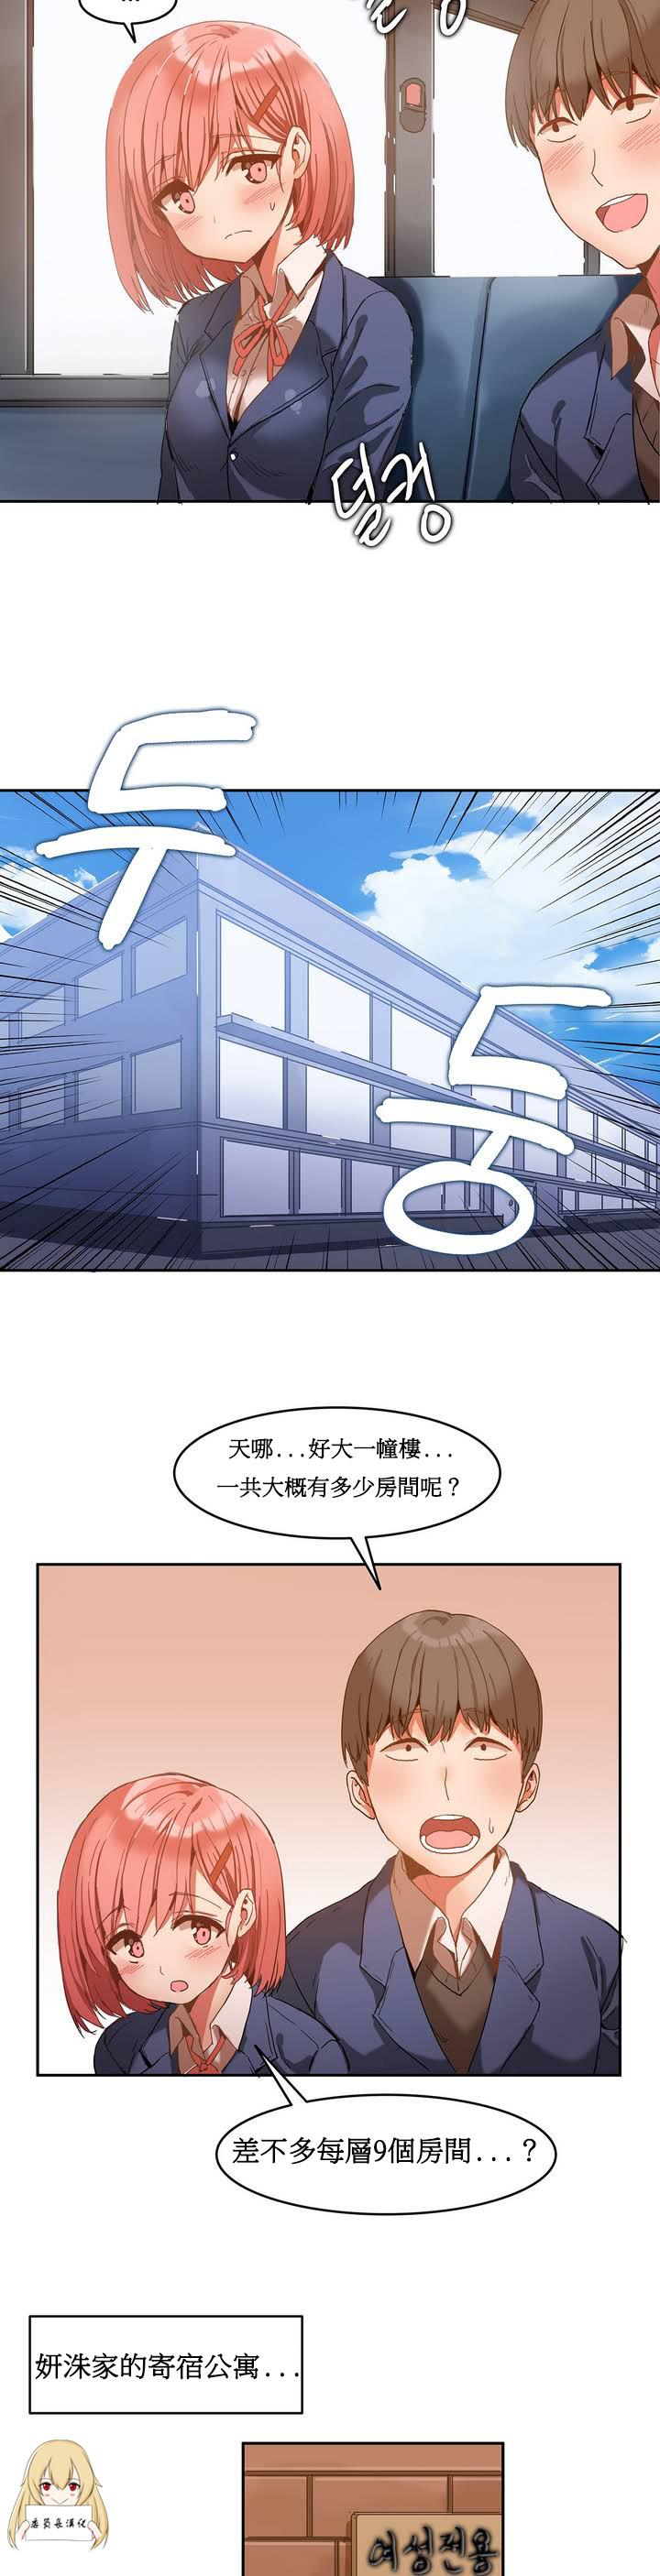 Hot Fucking Hahri's Lumpy Boardhouse Ch. 0~29【委員長個人漢化】（持續更新） Man - Page 11